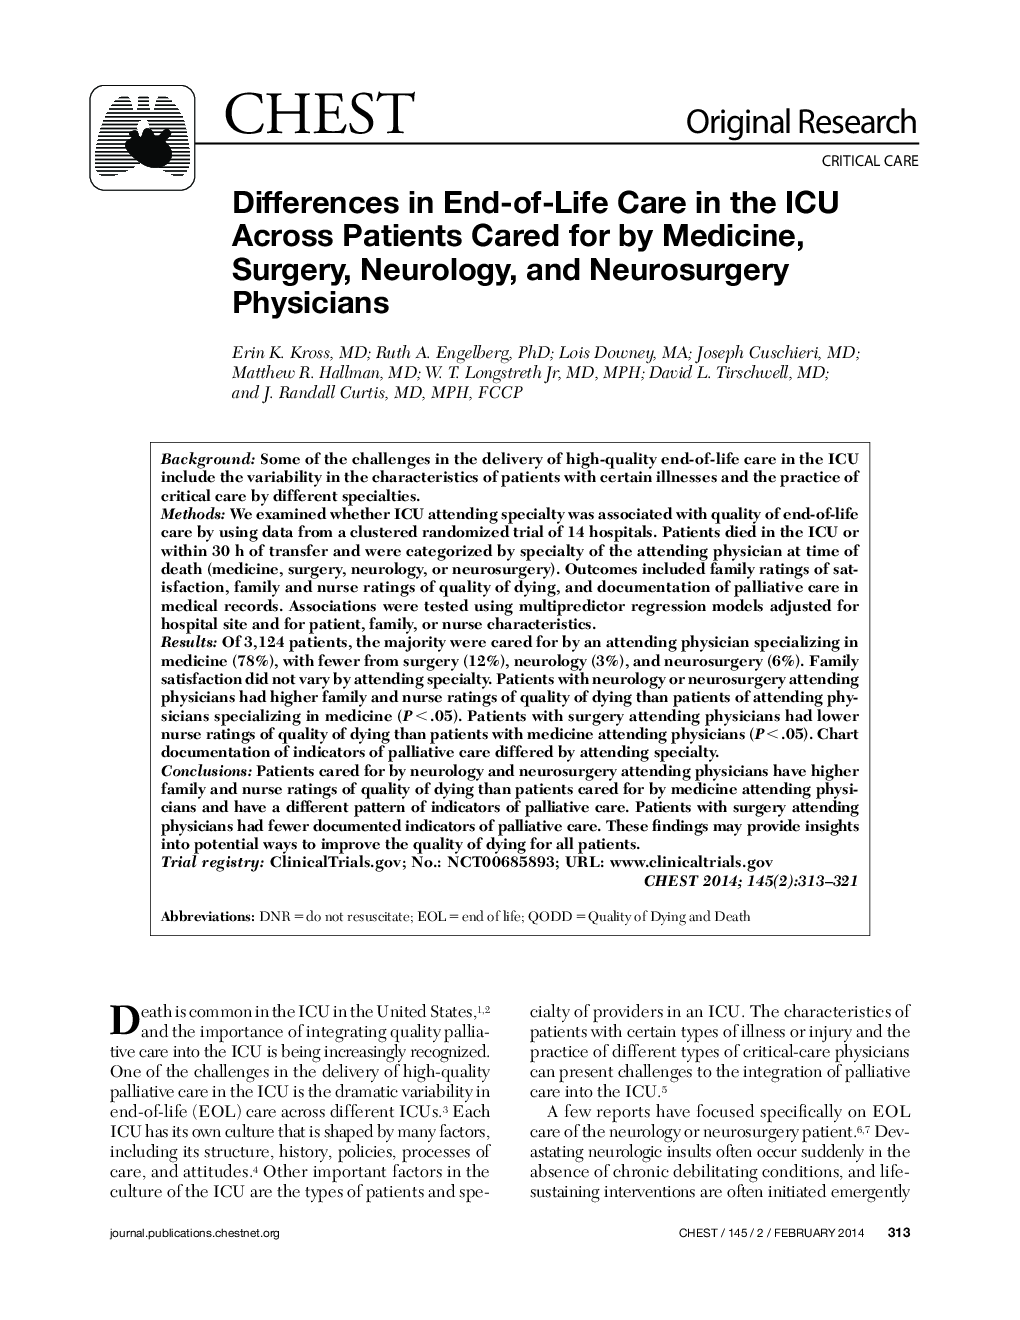 Differences in End-of-Life Care in the ICU Across Patients Cared for by Medicine, Surgery, Neurology, and Neurosurgery Physicians